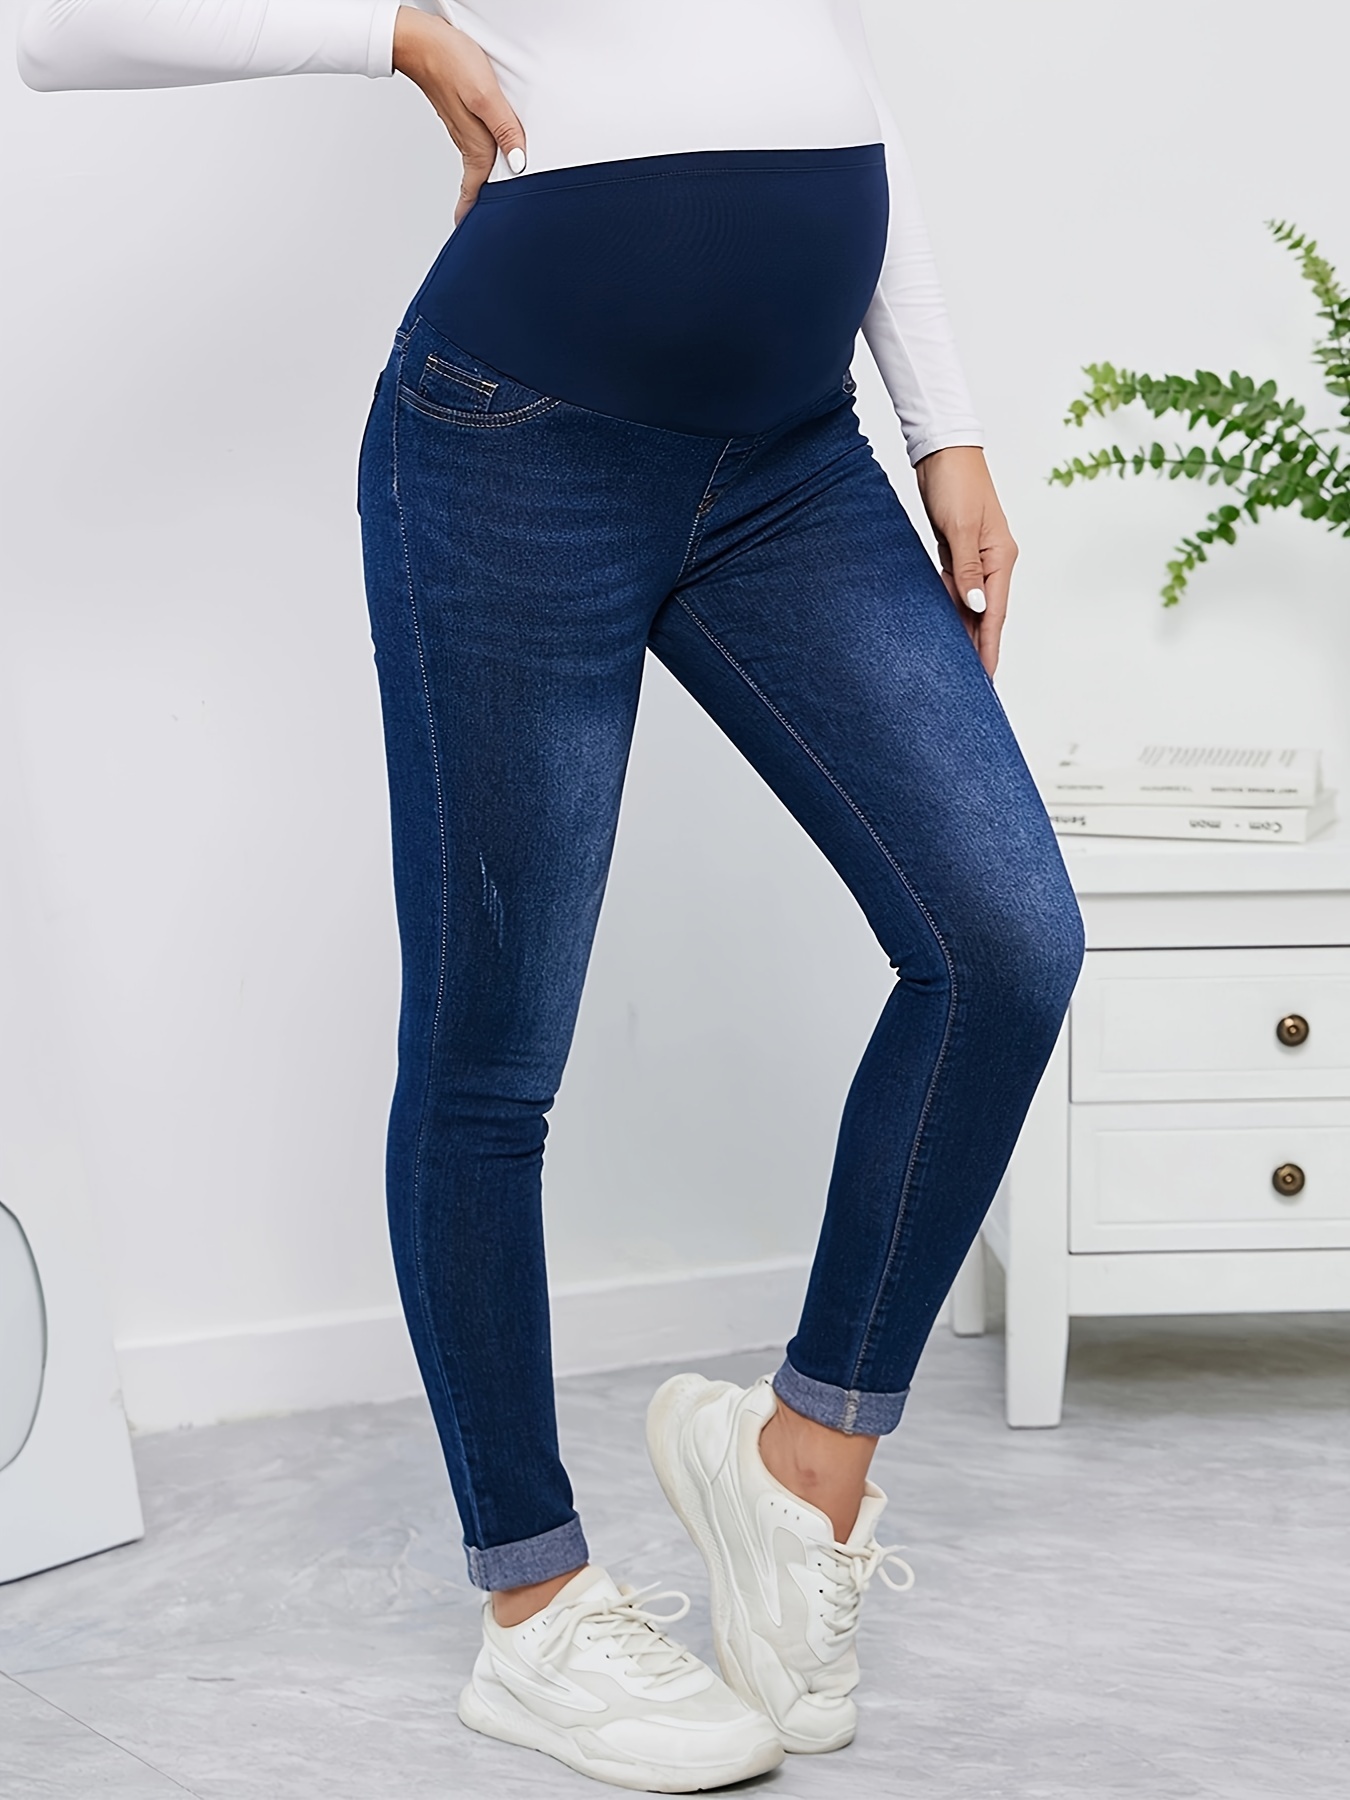 Women's Maternity Skinny Jeans Comfy Stretch High Waist Over The